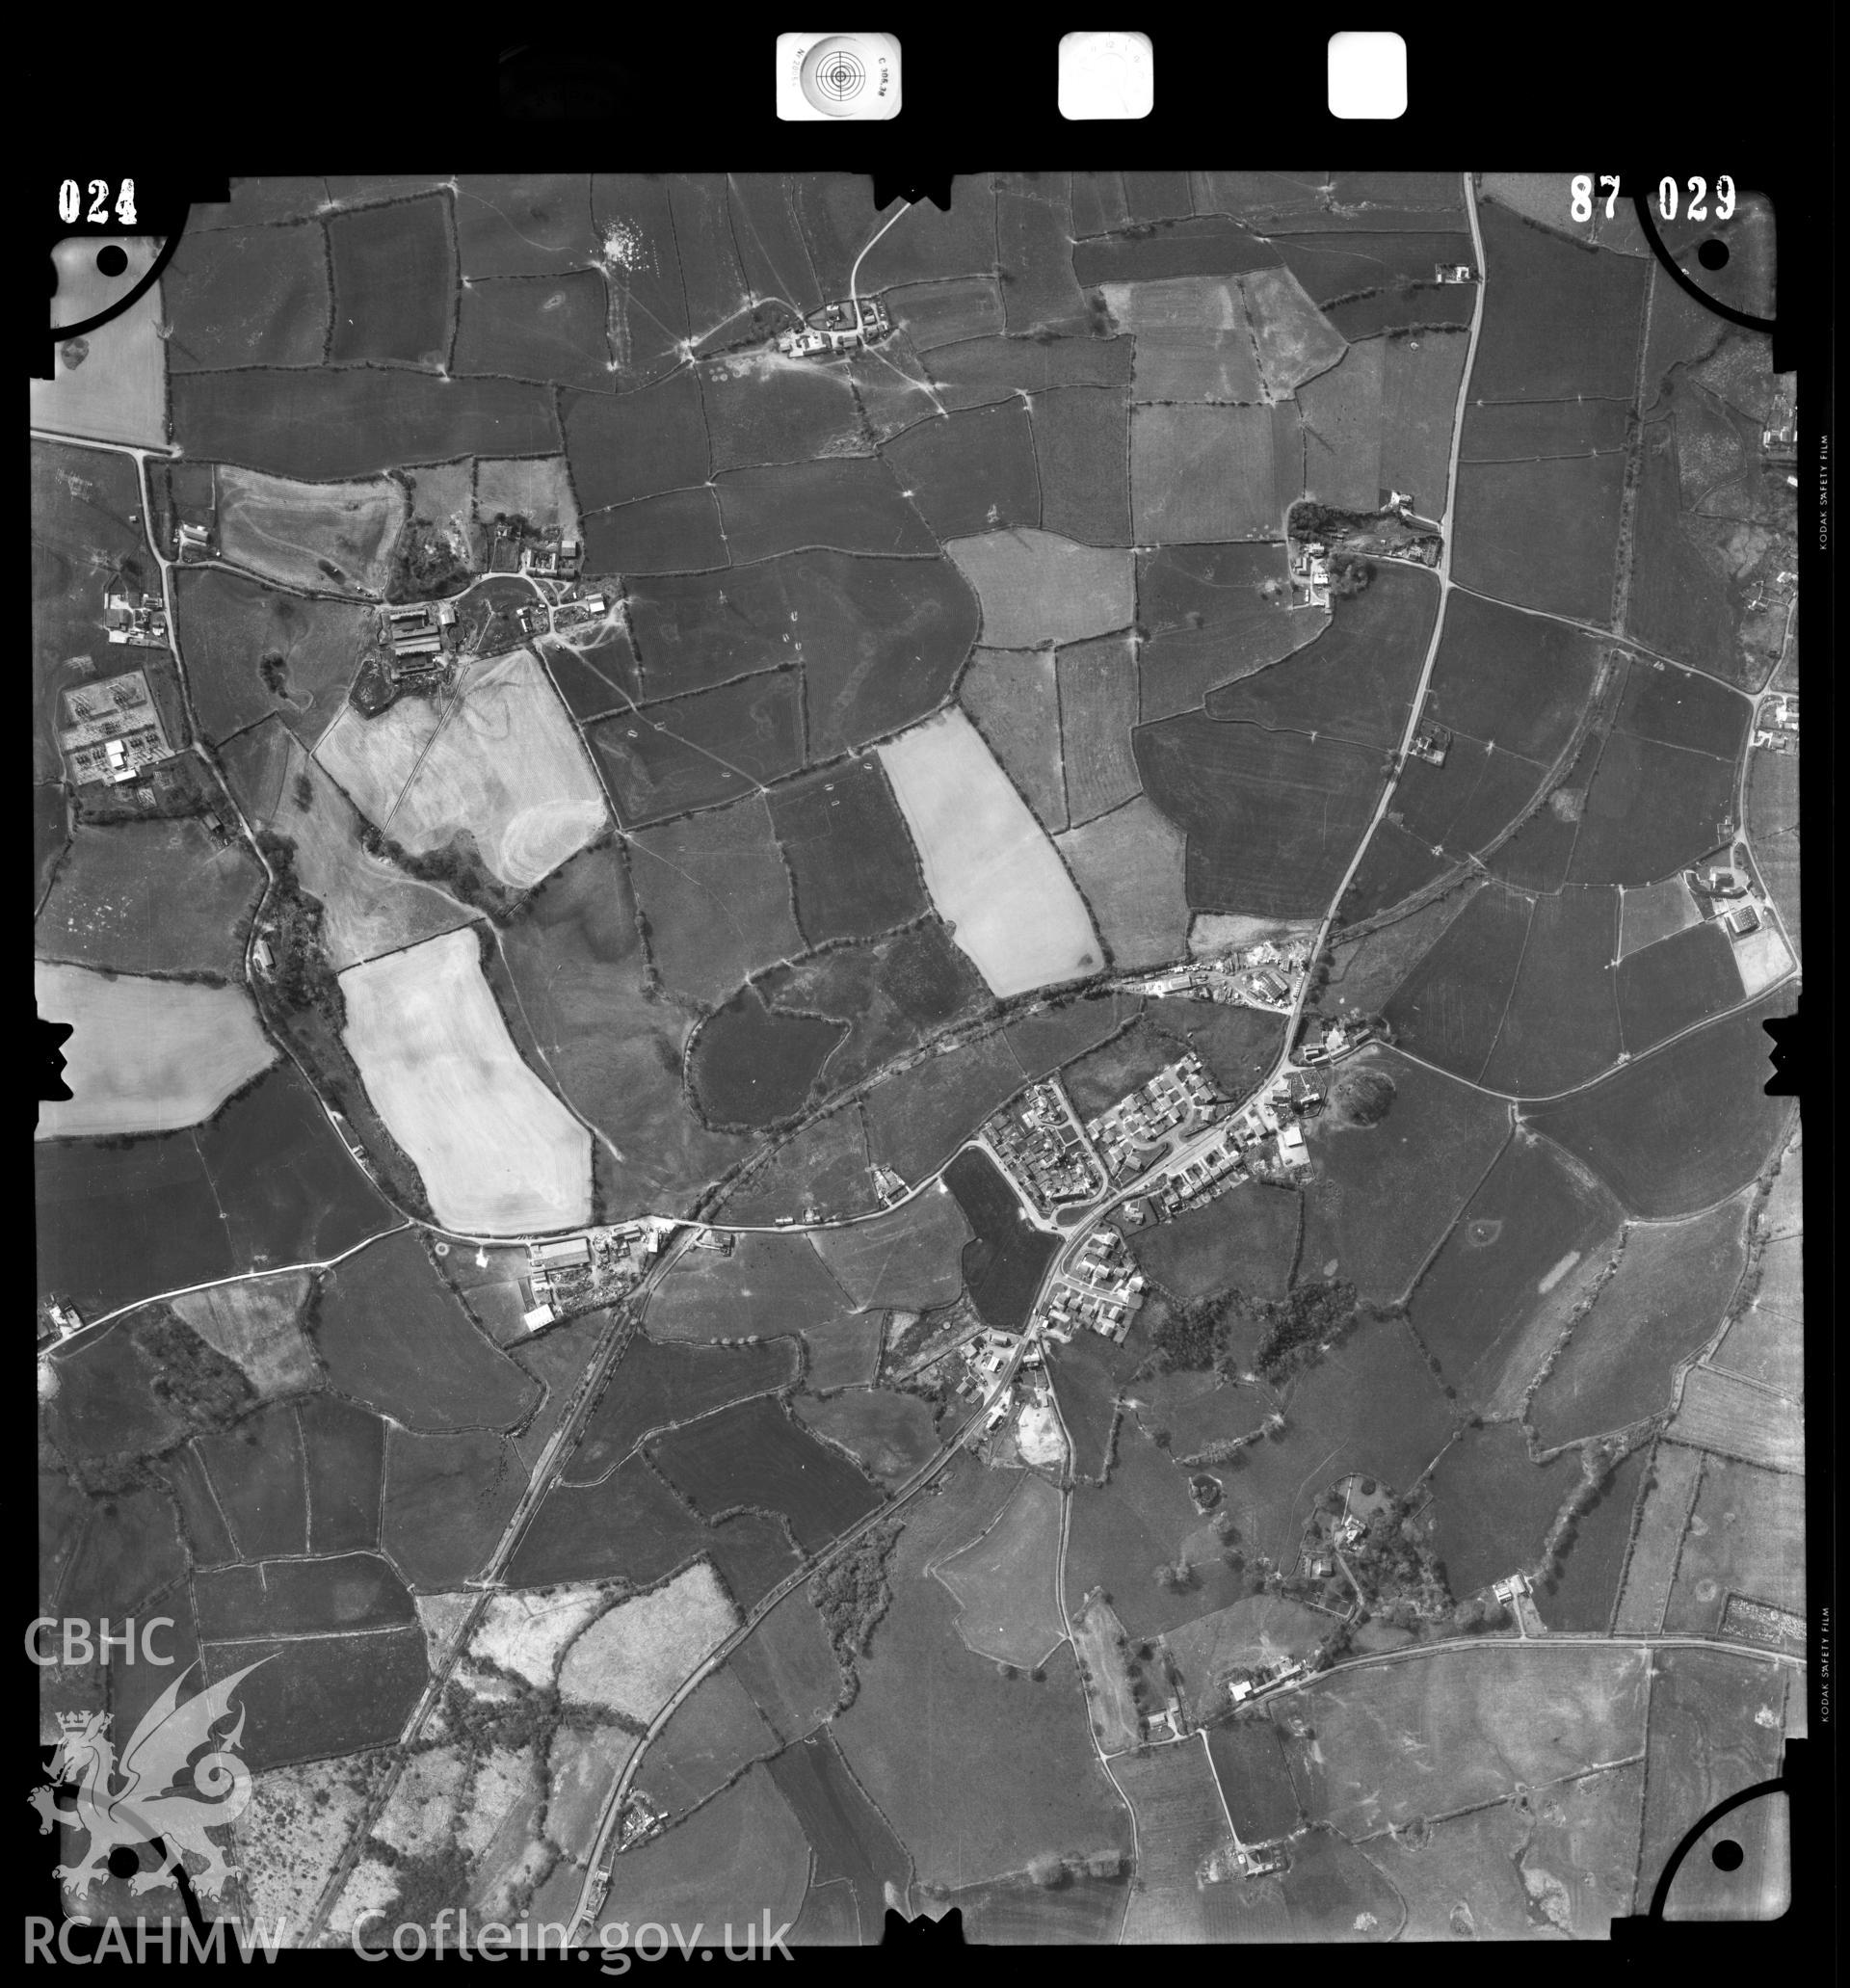 Digitised copy of an aerial photograph showing the St Athan area, taken by Ordnance Survey, 1987.